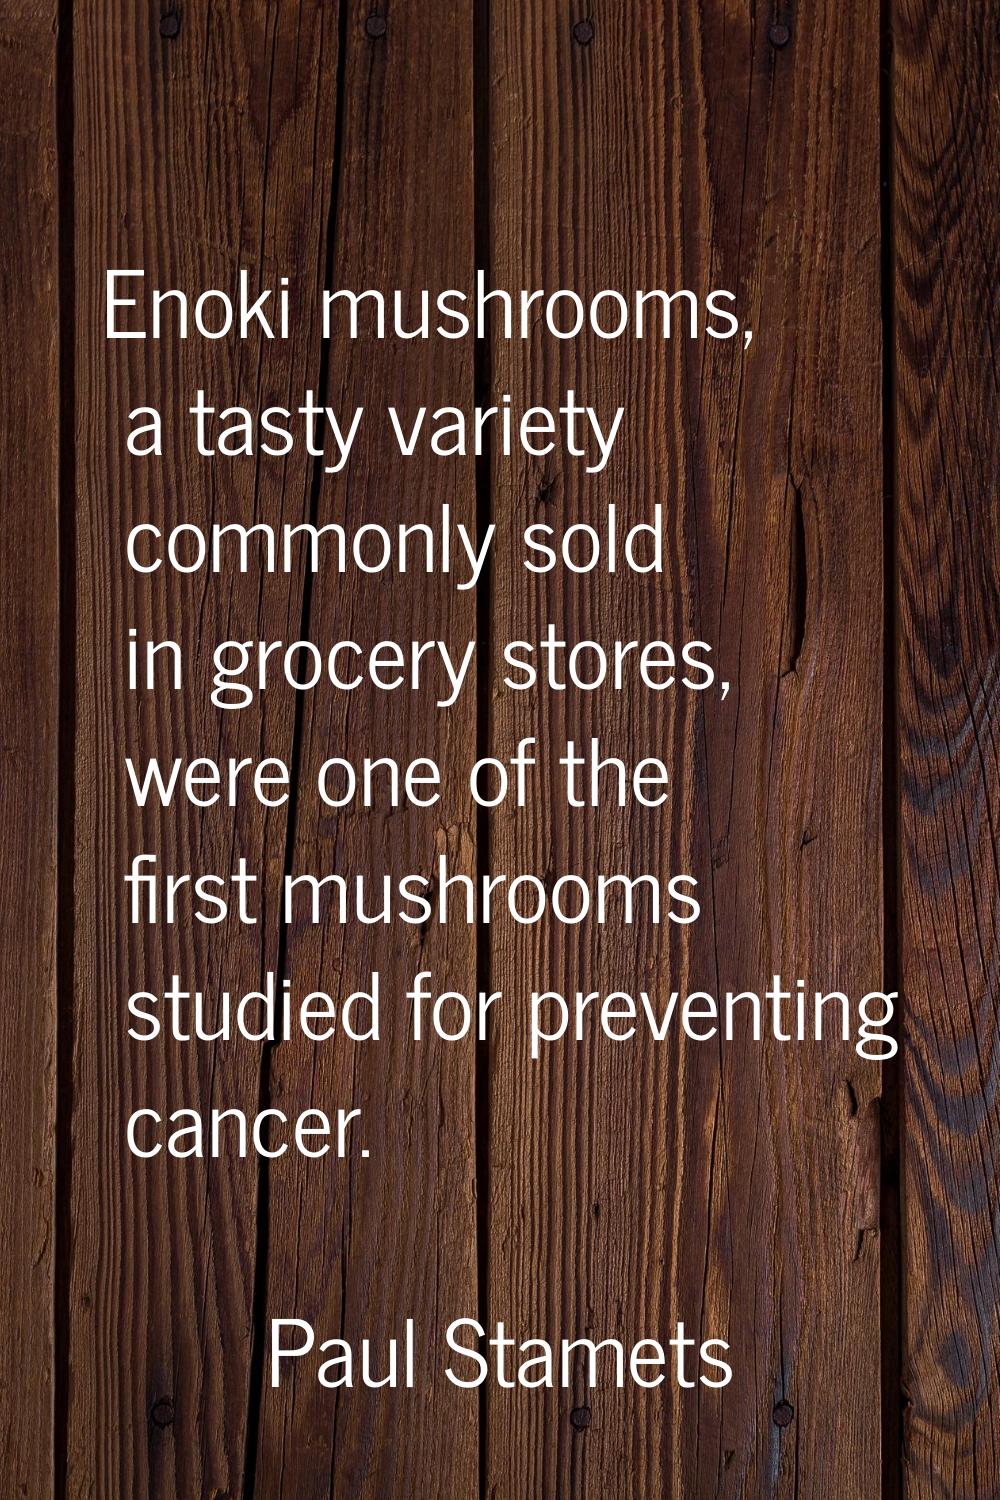 Enoki mushrooms, a tasty variety commonly sold in grocery stores, were one of the first mushrooms s